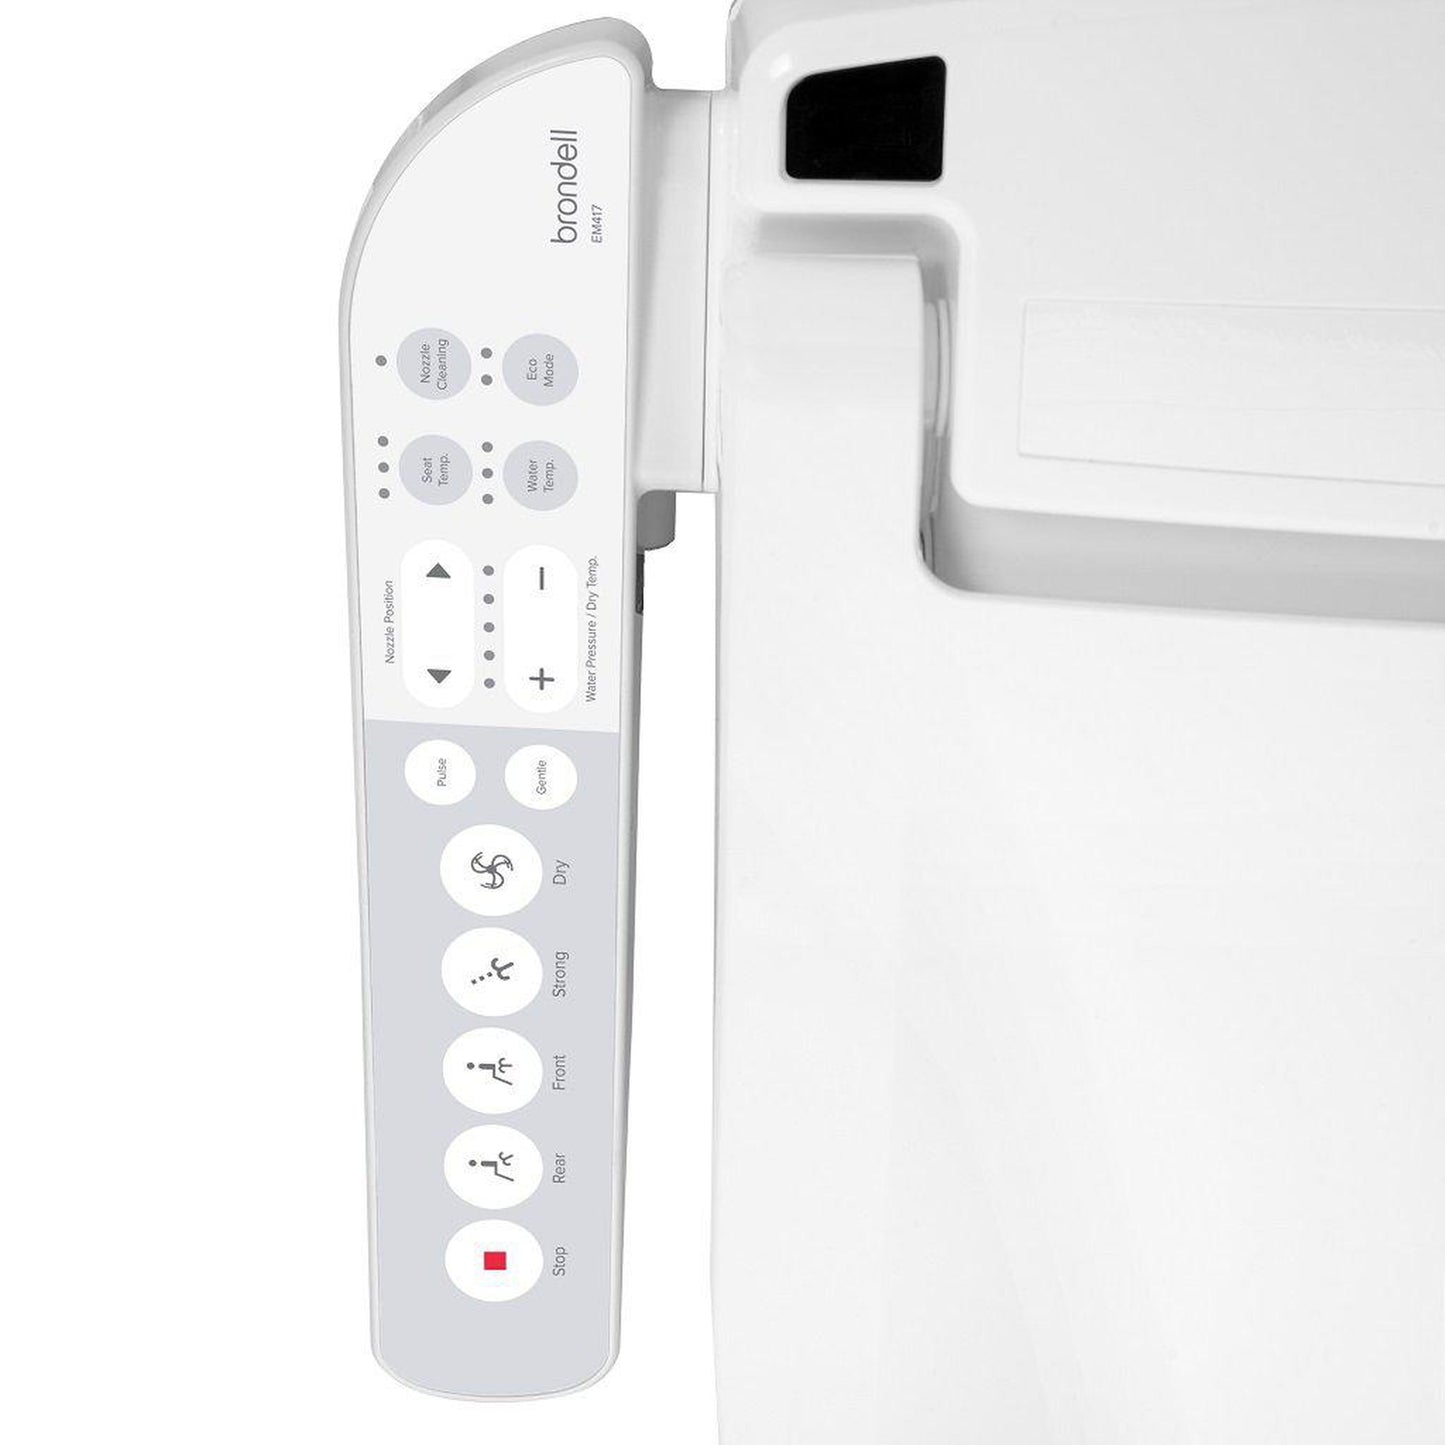 Brondell Swash Select EM417 19.5" White Round Electric Advanced Bidet Toilet Seat With Side Control Panel